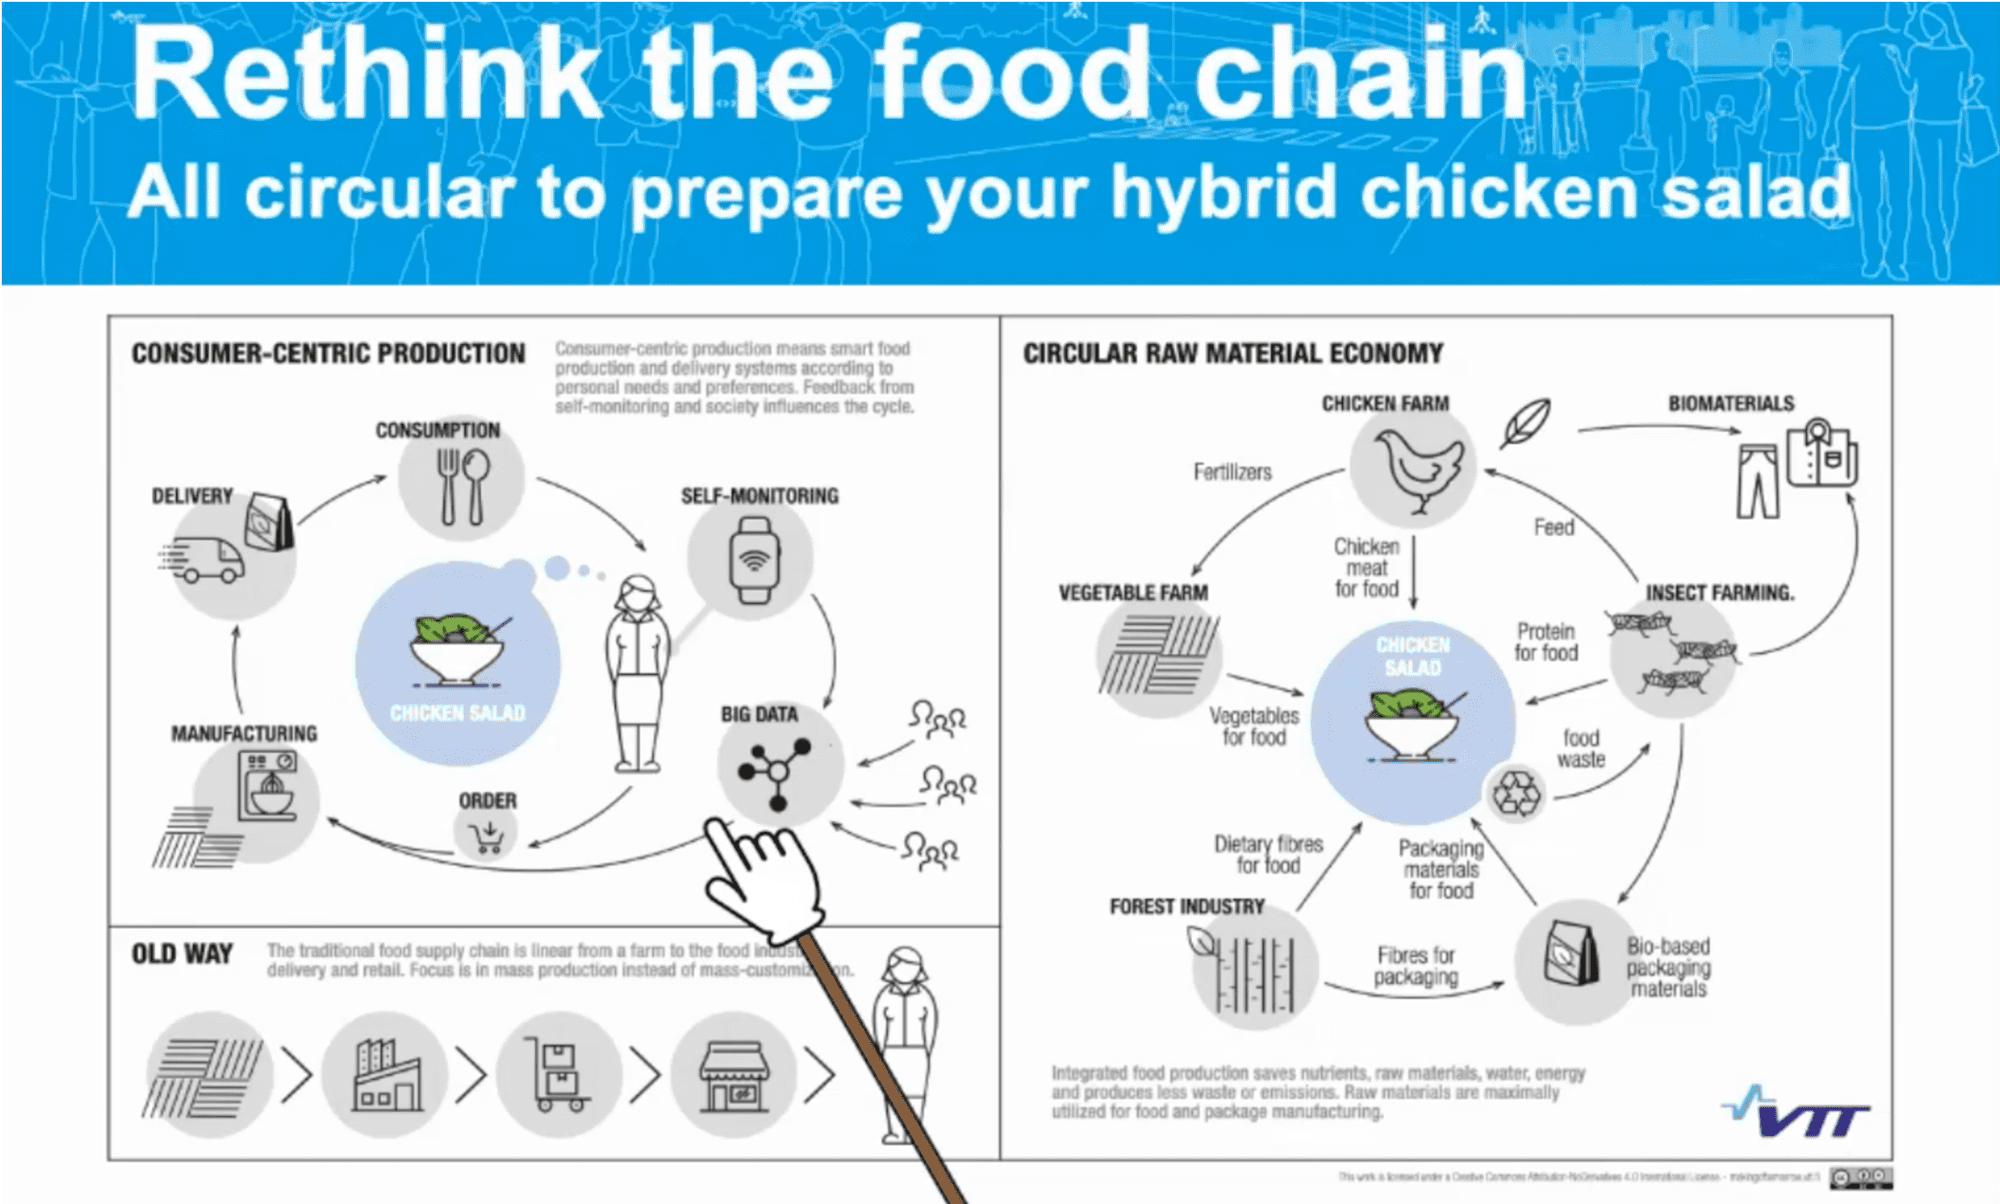 Rethink the food chain